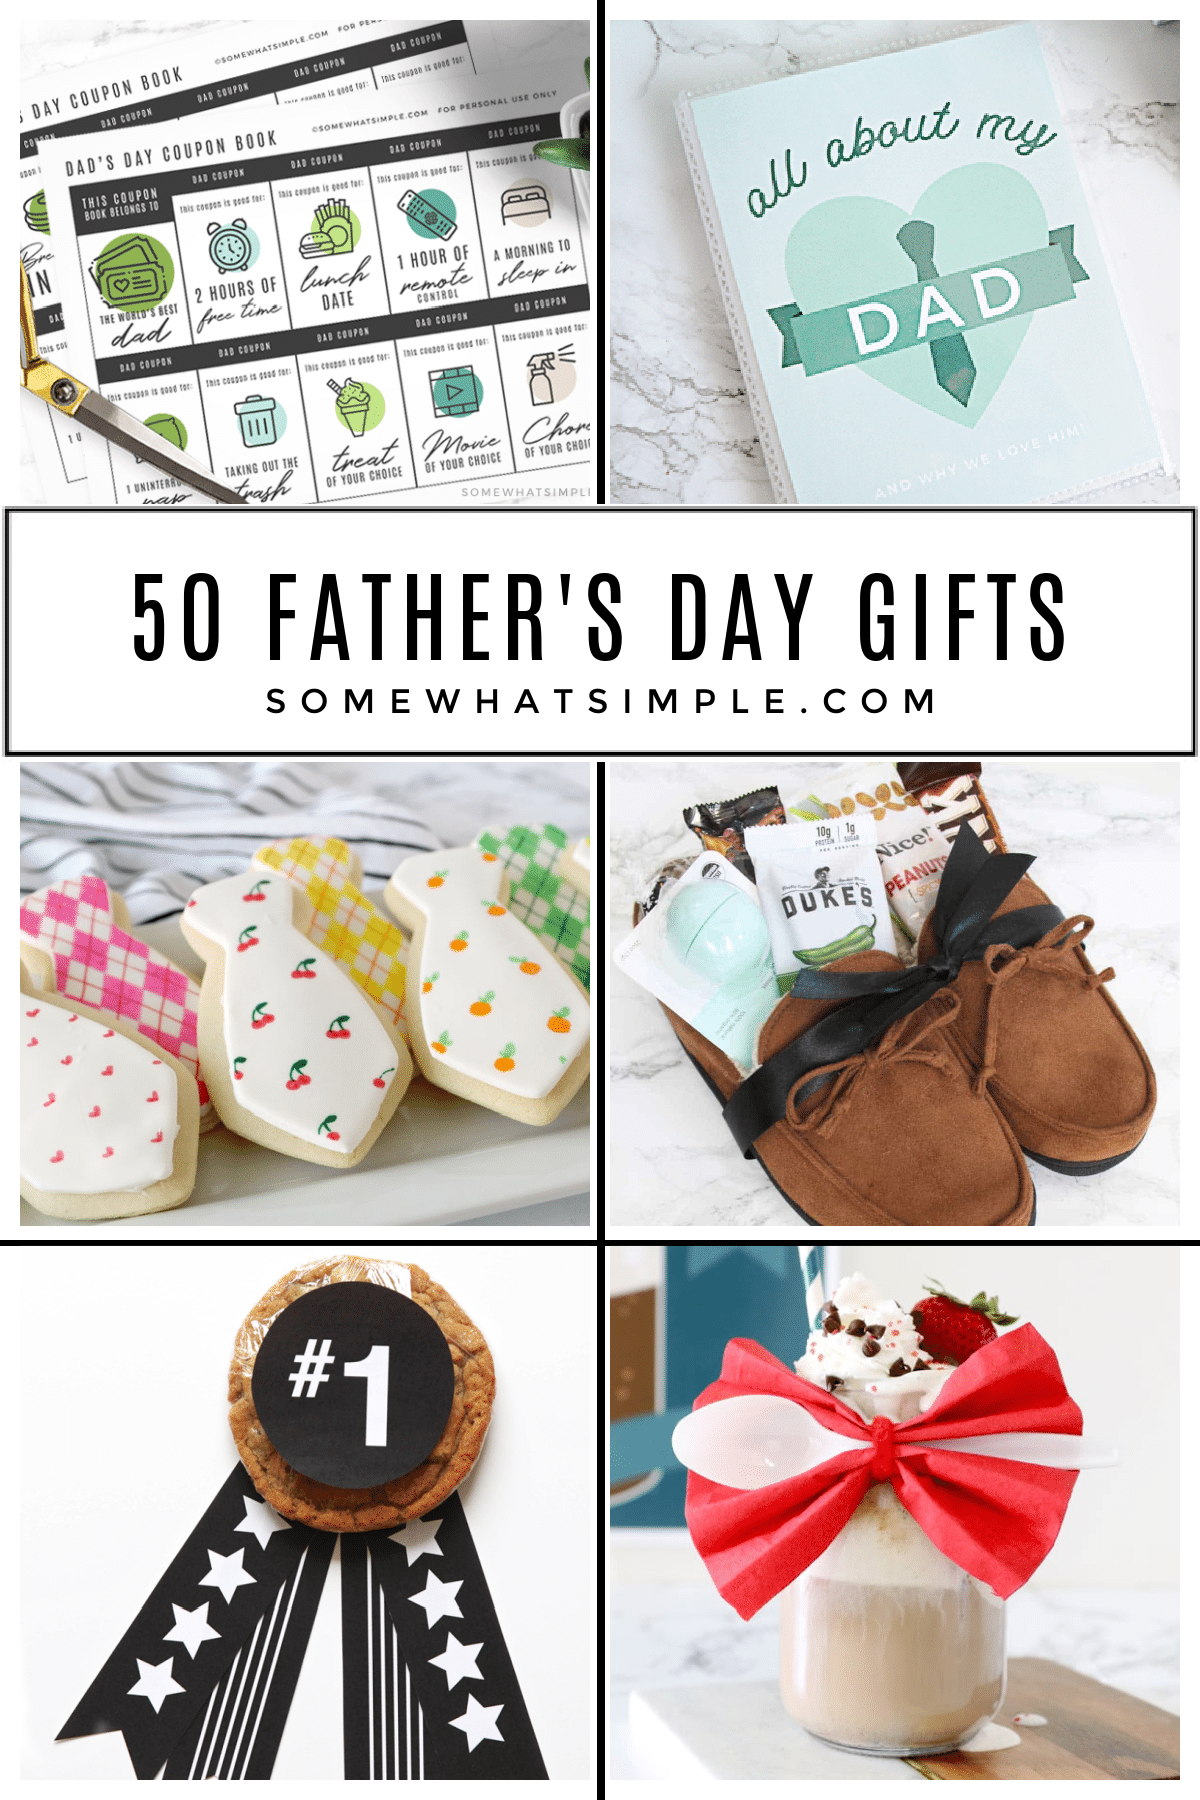 50 Simple Father's Day Gift Ideas - from Somewhat Simple